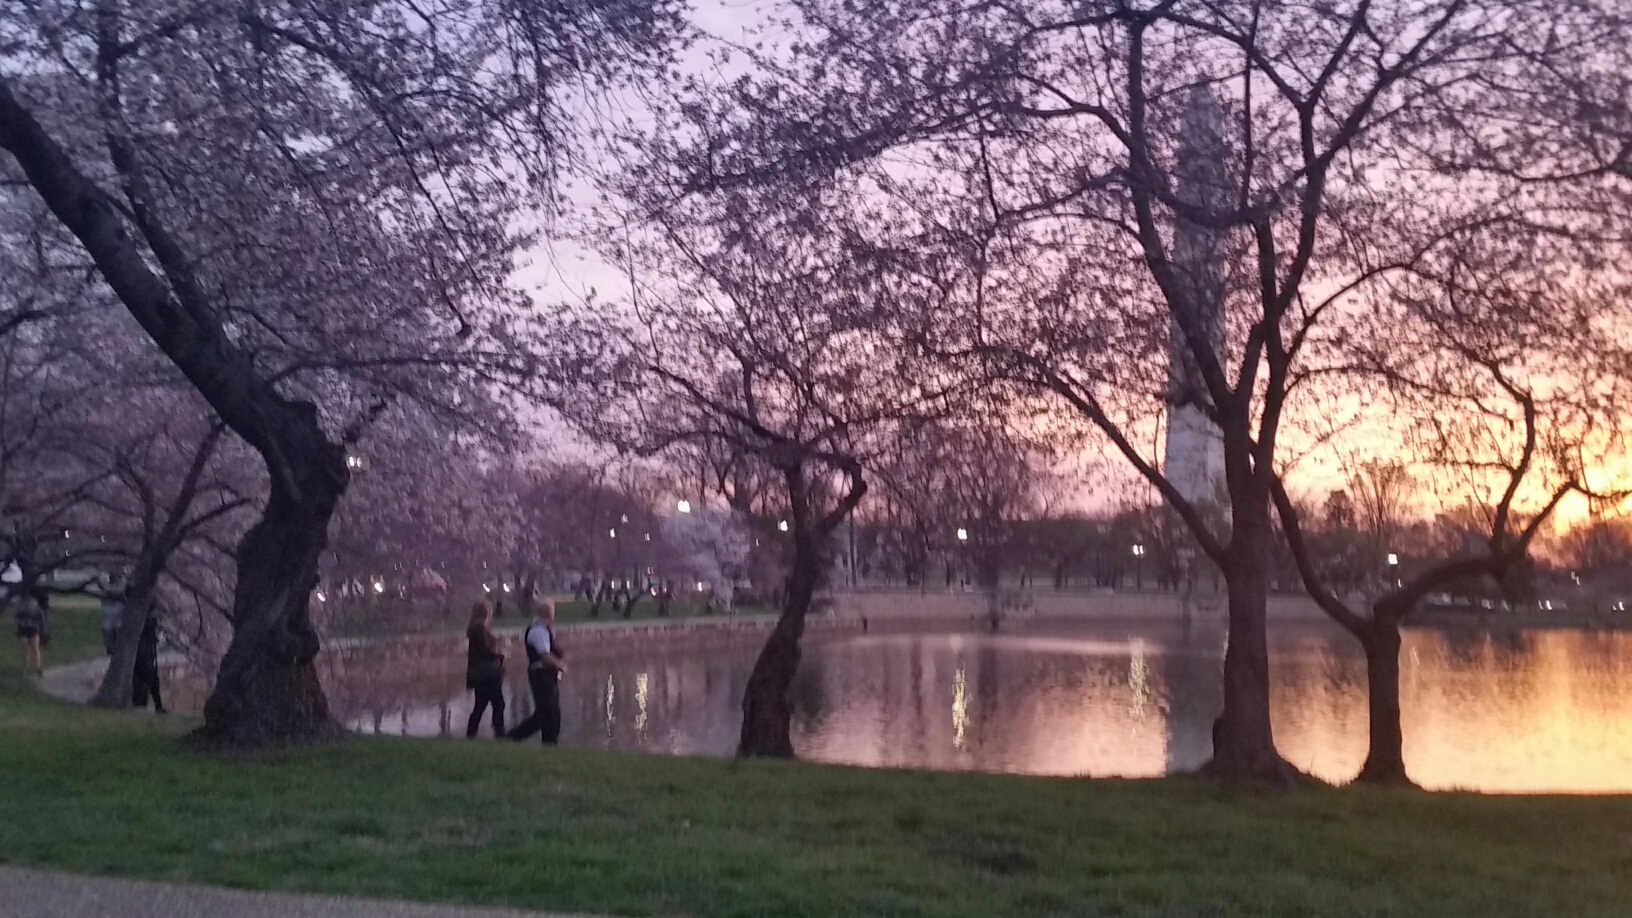 The cherry blossoms on the morning of March 23, 2016. (WTOP/Kathy Stewart)